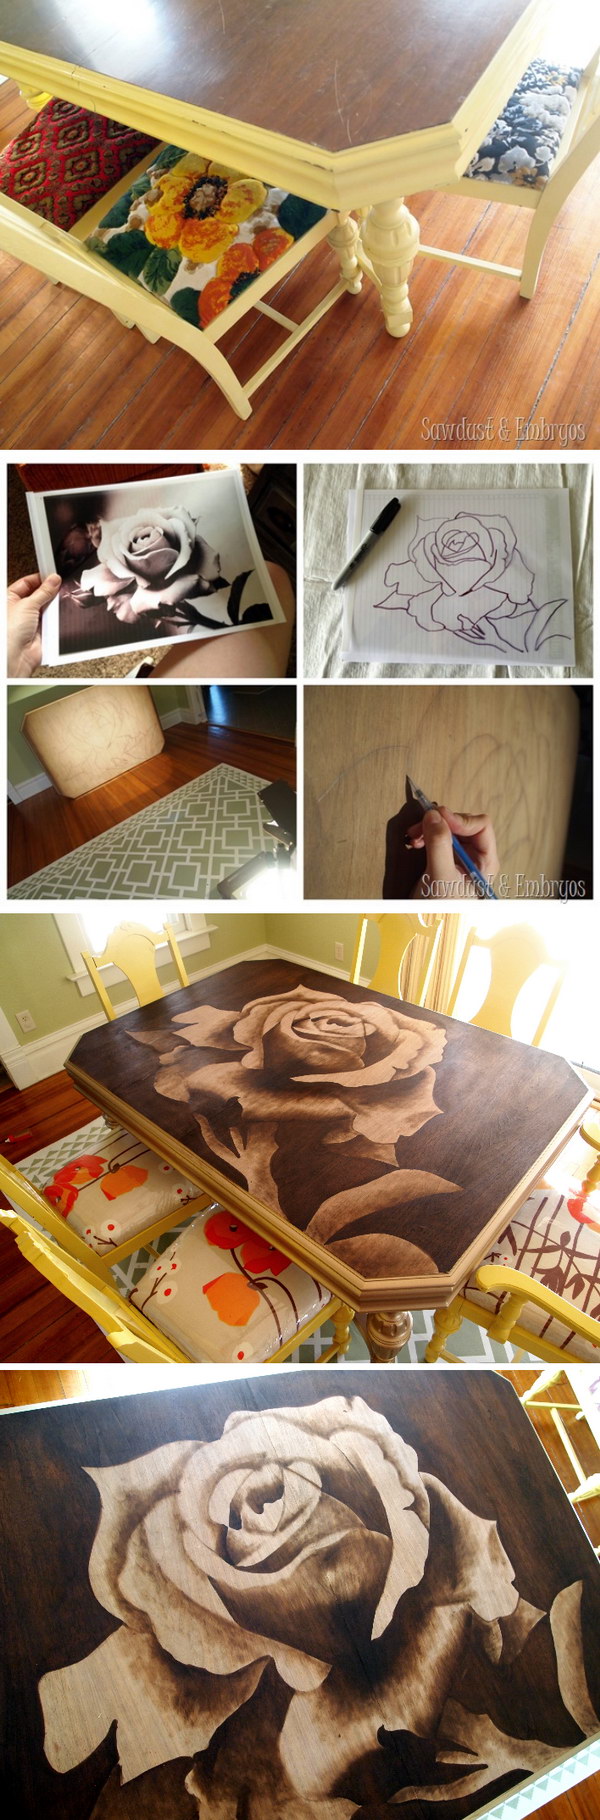 25 DIY Ideas & Tutorials for Using Wood Stains